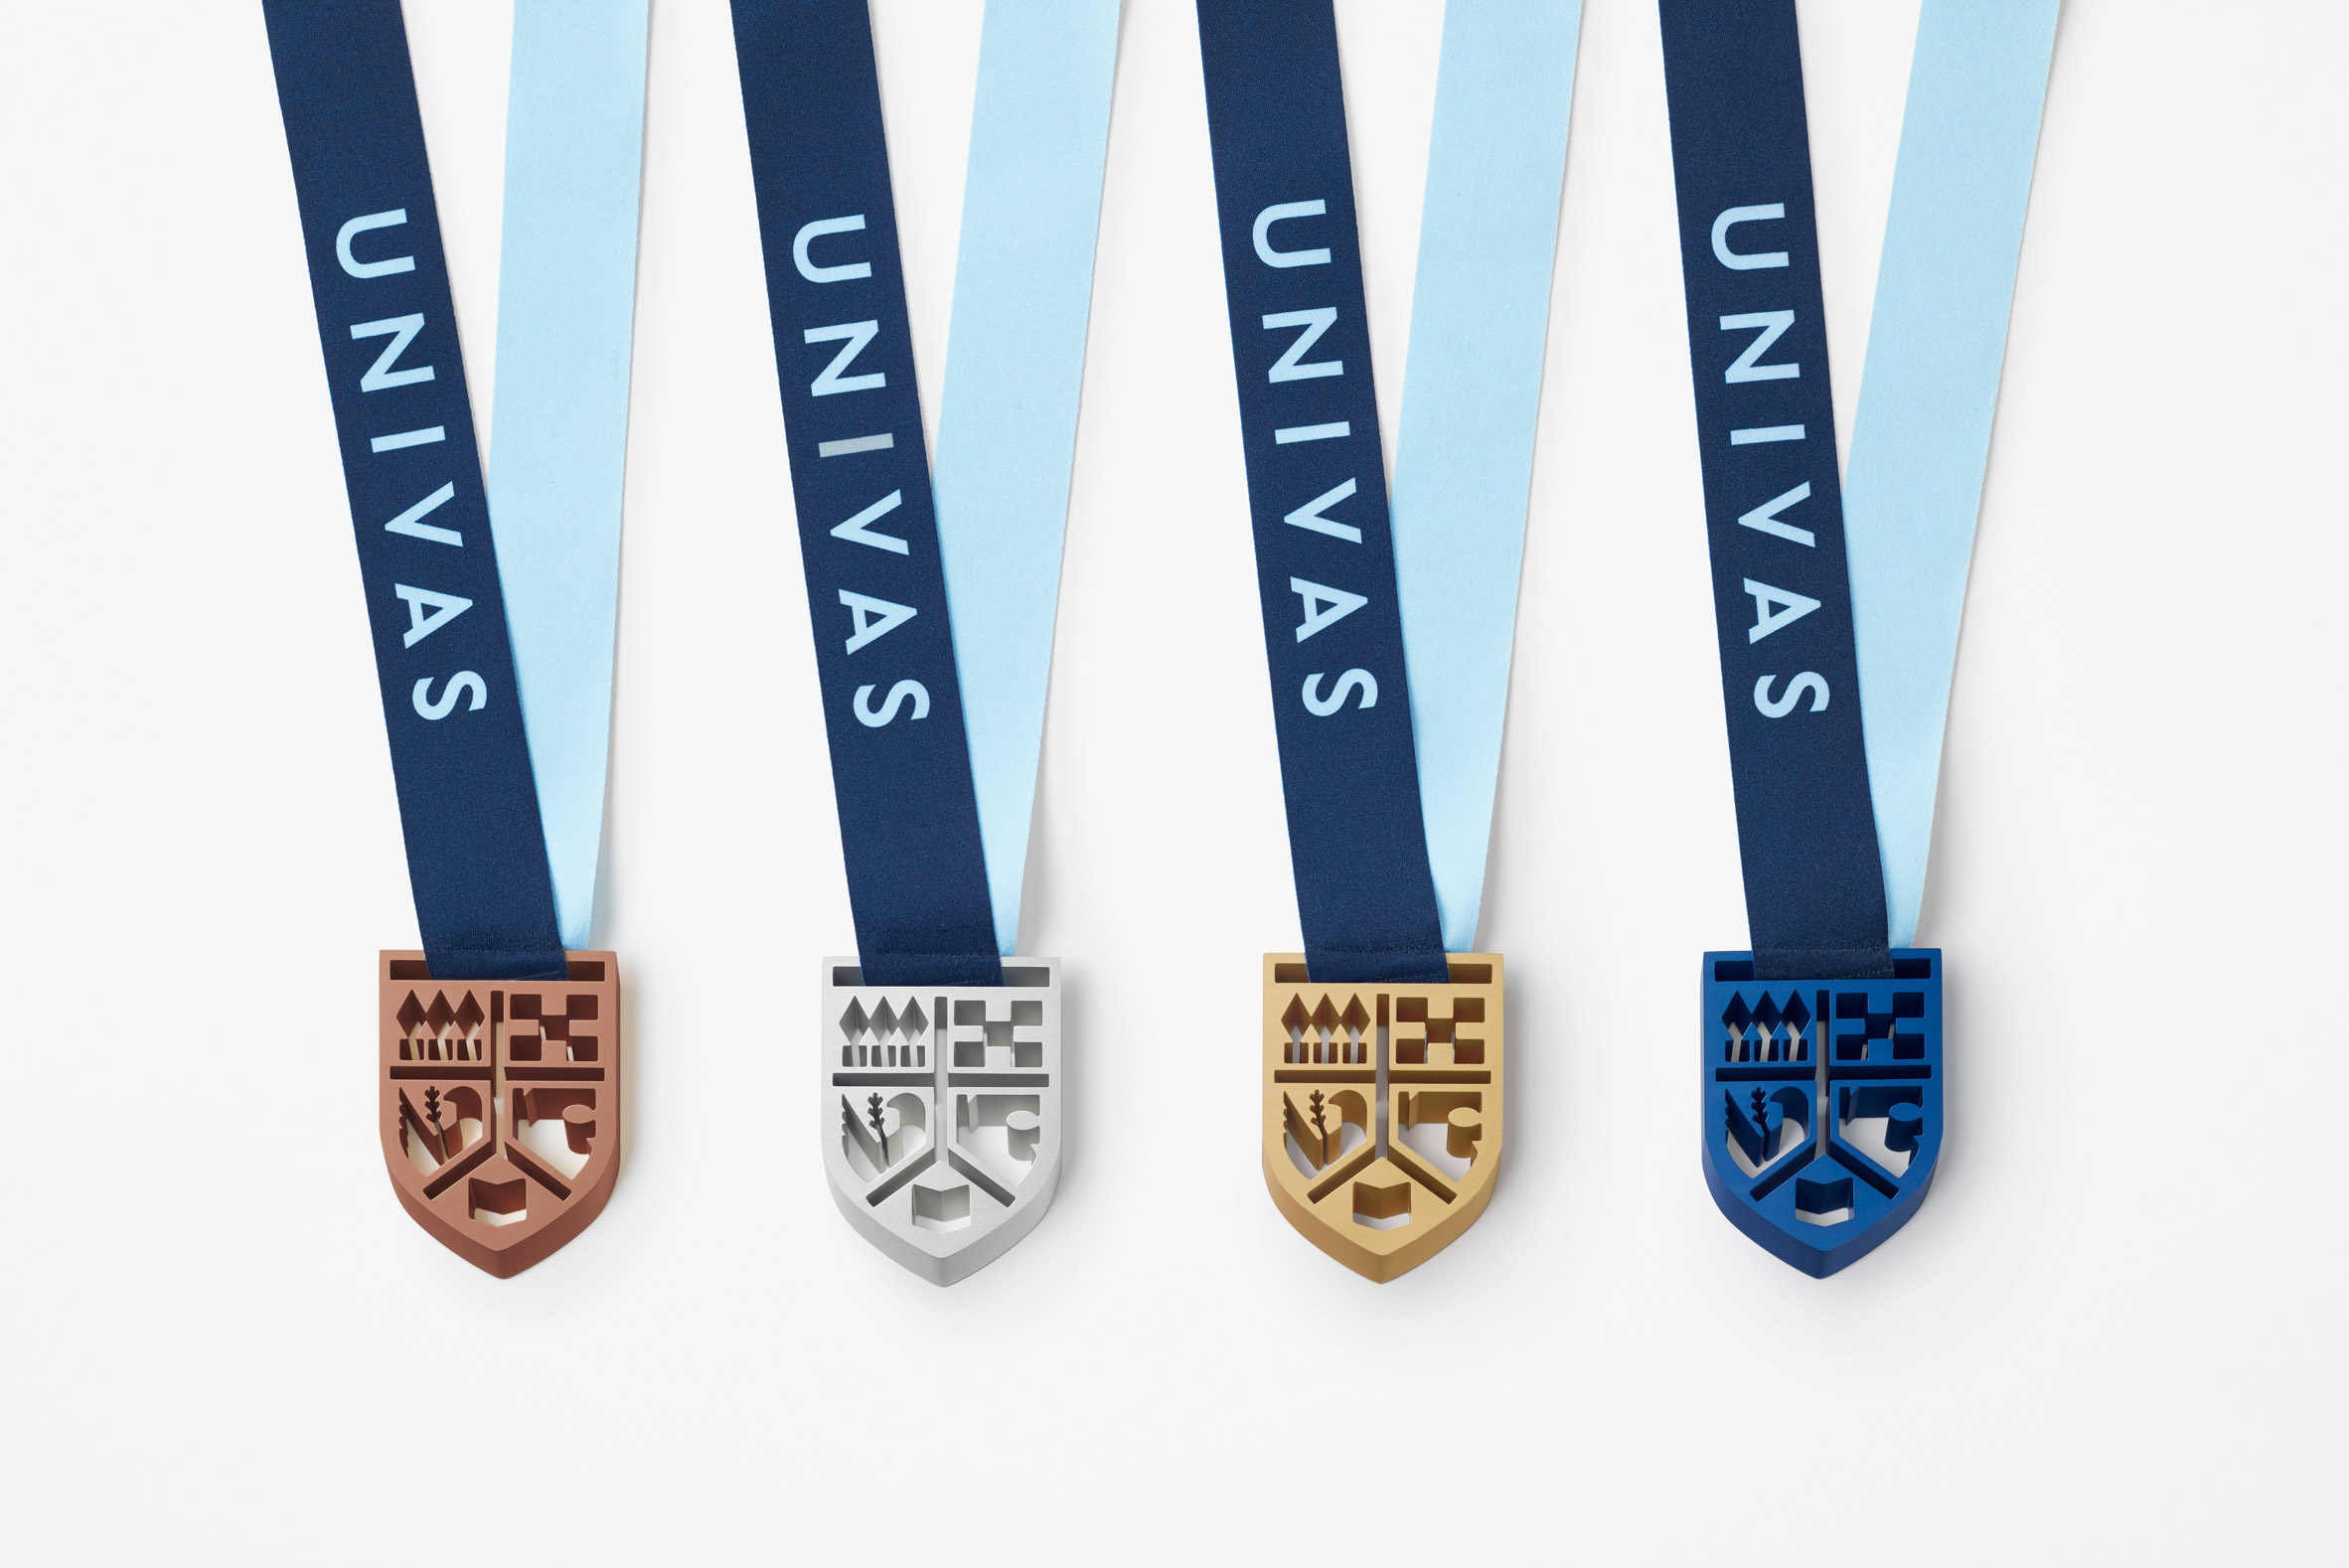 Medals by Nendo for UNIVAS